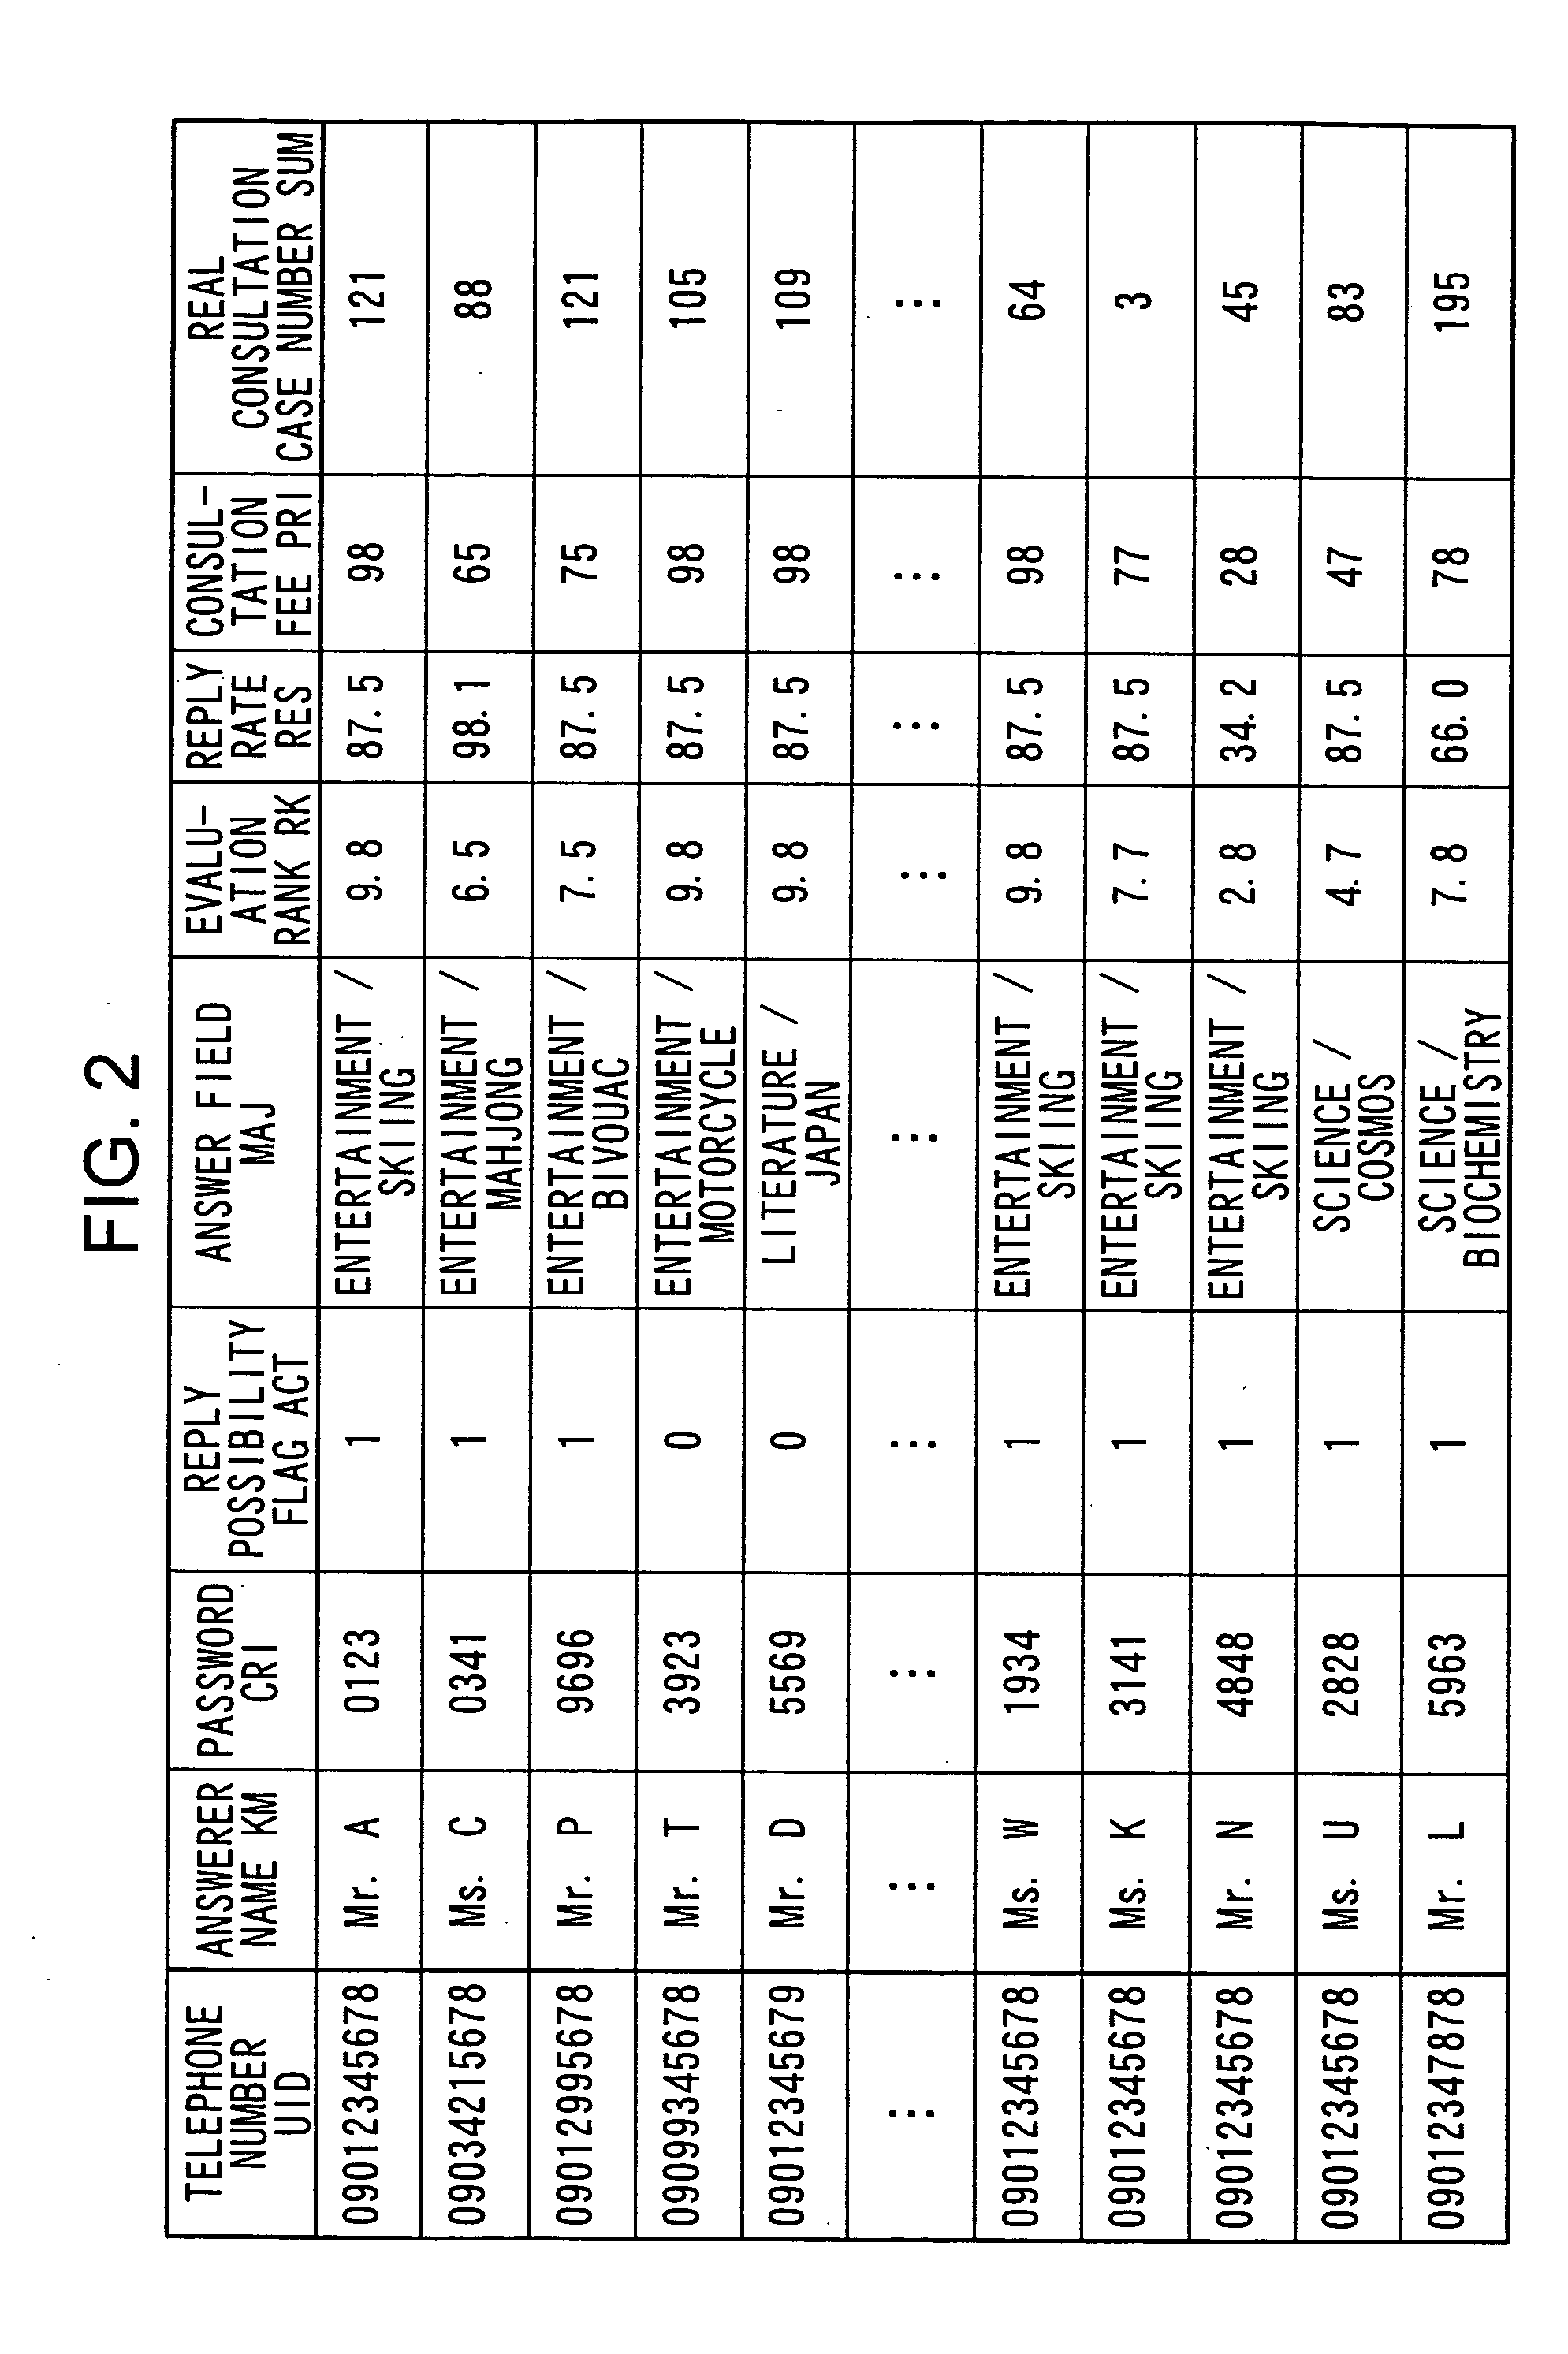 Apparatus and method for mediating between callers and receivers using mobile phones